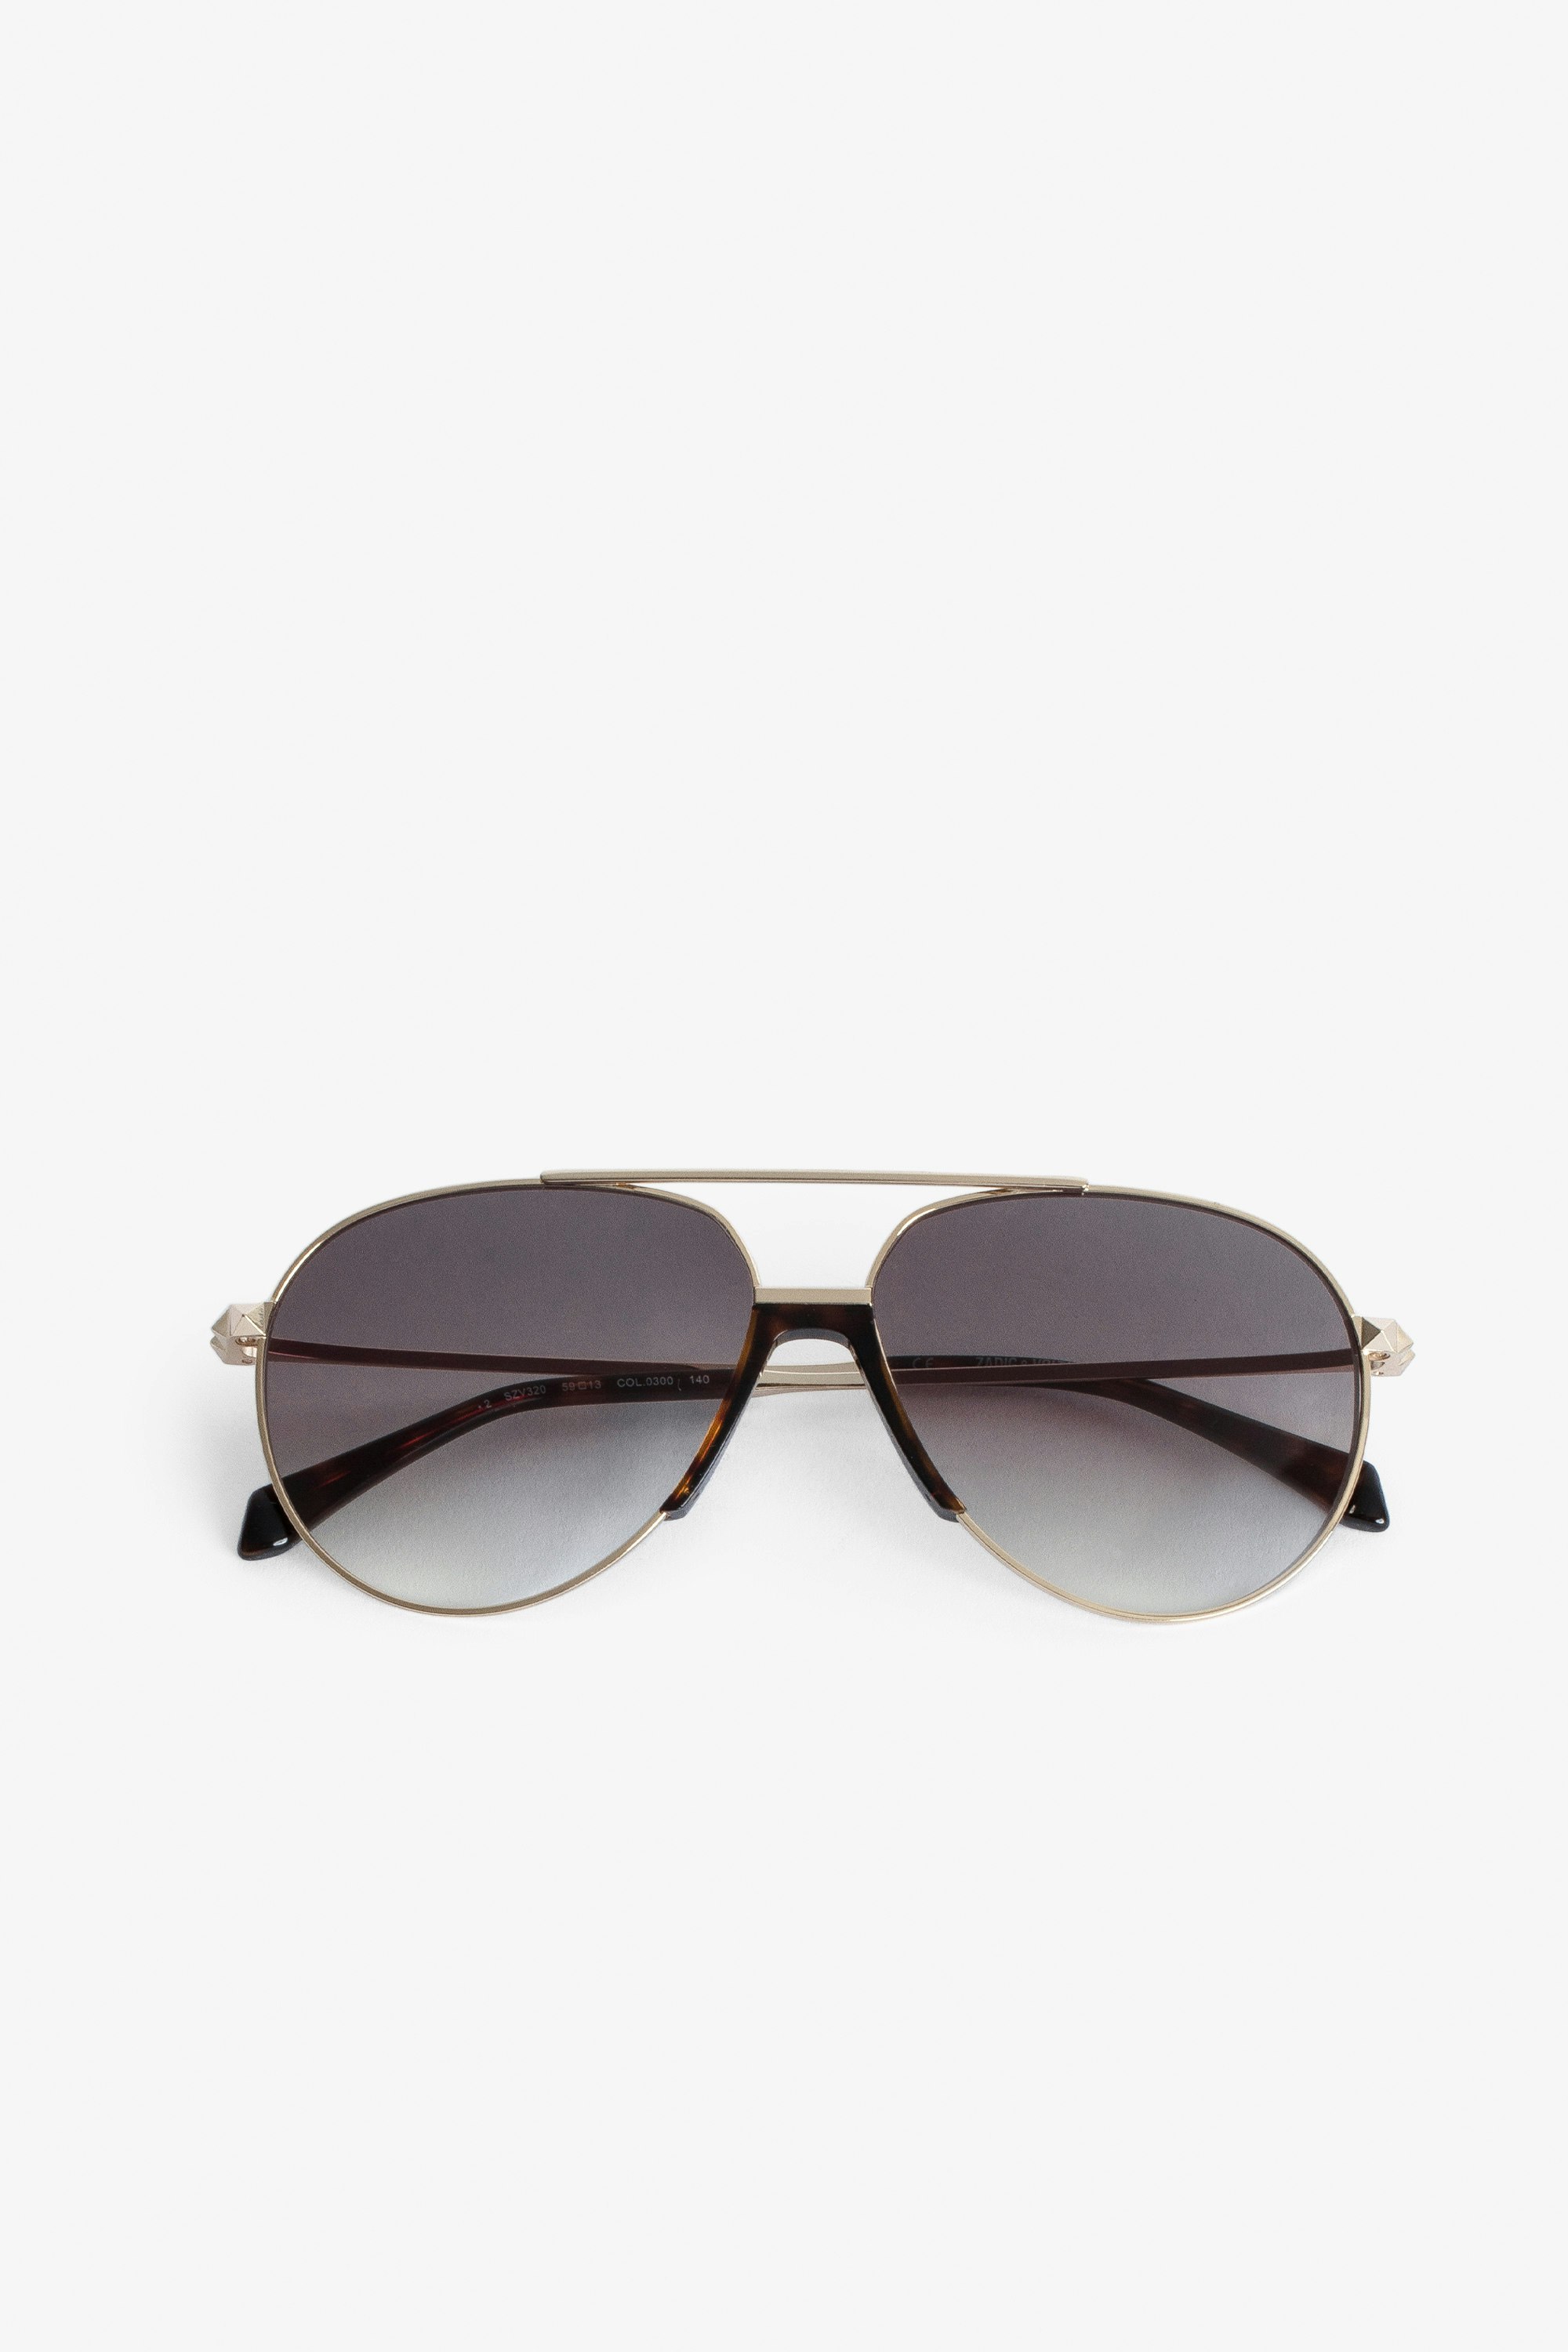 Pyramid Studs Sunglasses - Brown Pyramid Studs sunglasses with smoked lenses decorated with pyramid studs